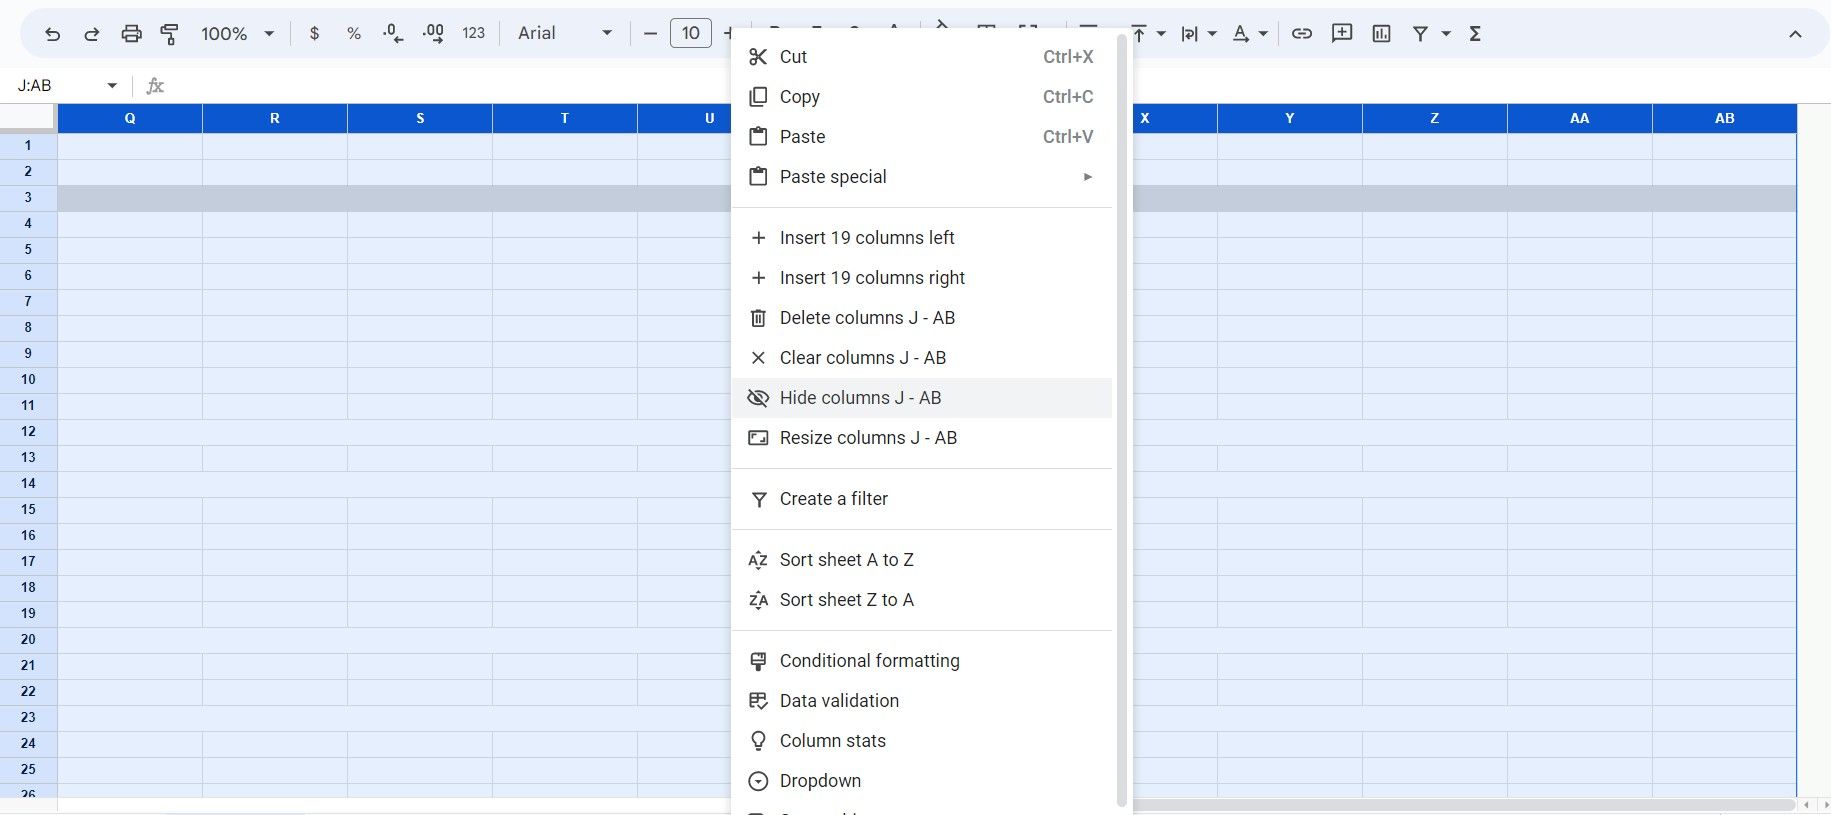 Hiding all unused columns in Google Sheets